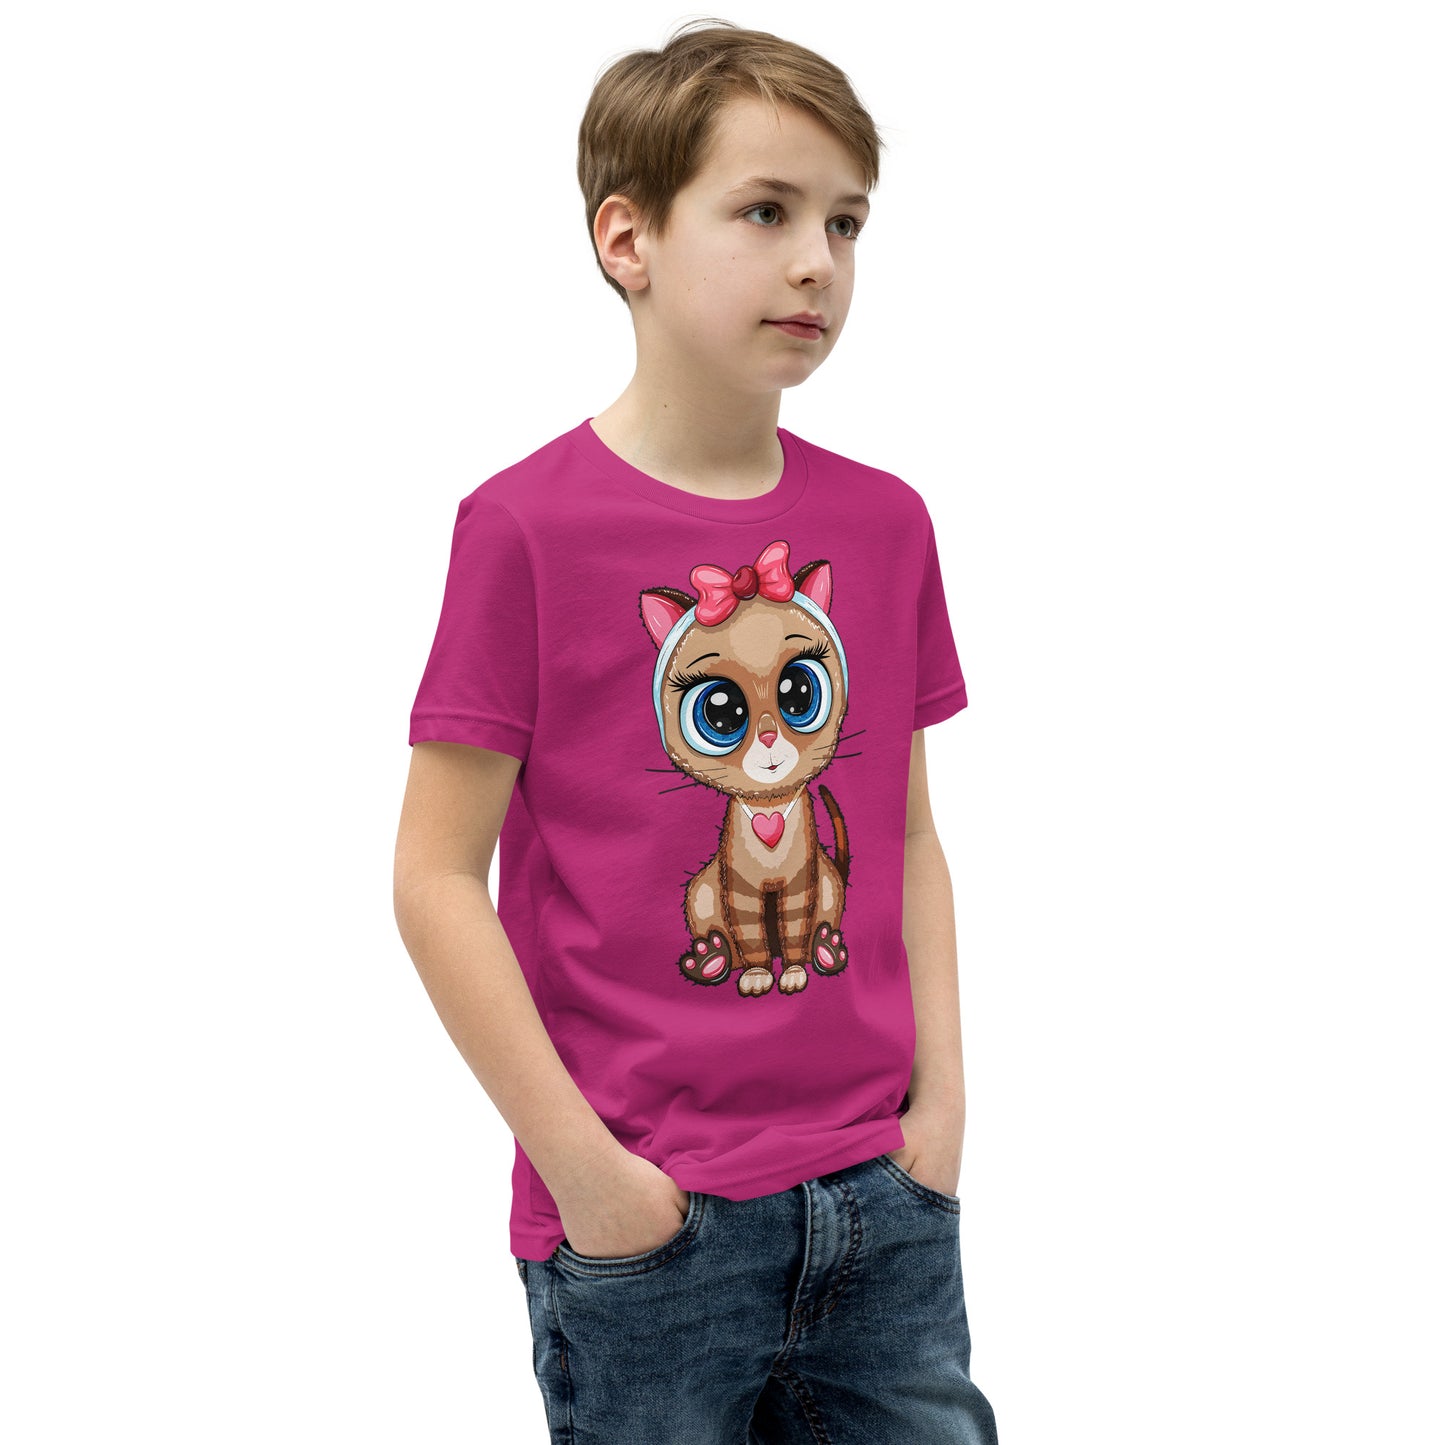 Cute Baby Cat with Big Eyes T-shirt, No. 0273